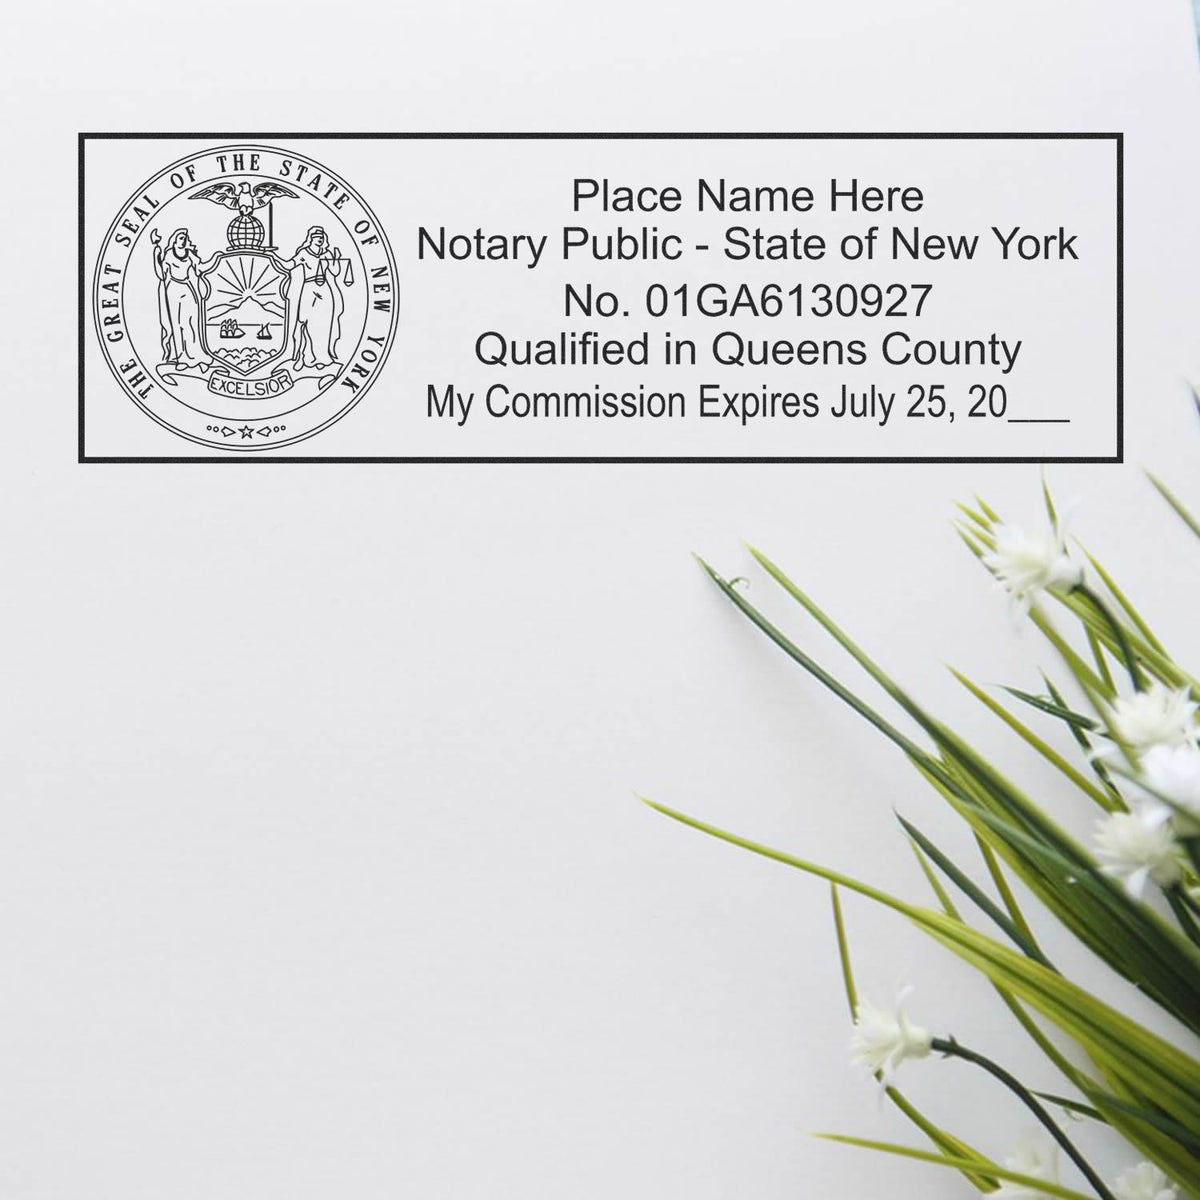 The Slim Pre-Inked State Seal Notary Stamp for New York stamp impression comes to life with a crisp, detailed photo on paper - showcasing true professional quality.